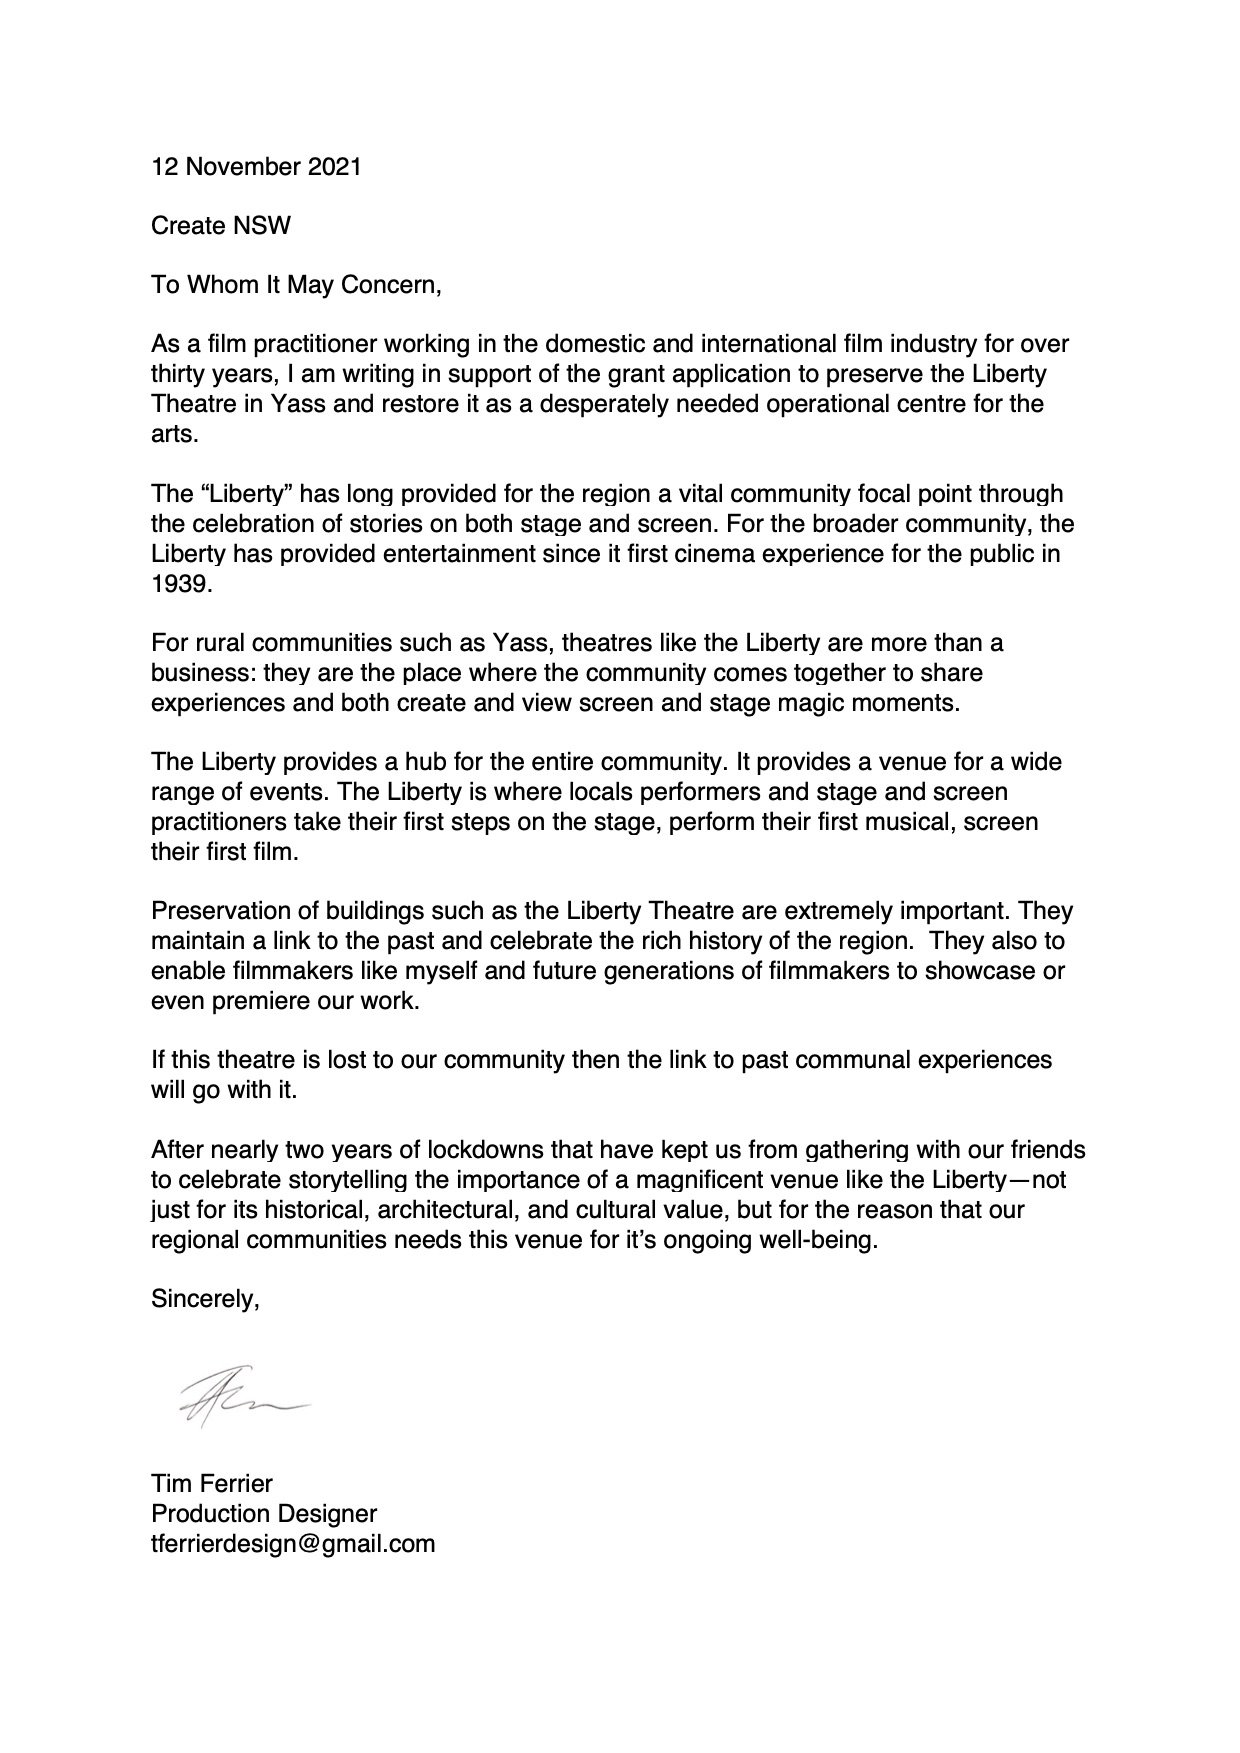 Ferrier Tim Set  Design,  Liberty Theatre Yass  letter  of  support  to CreateNSW 12th November 2021.jpg